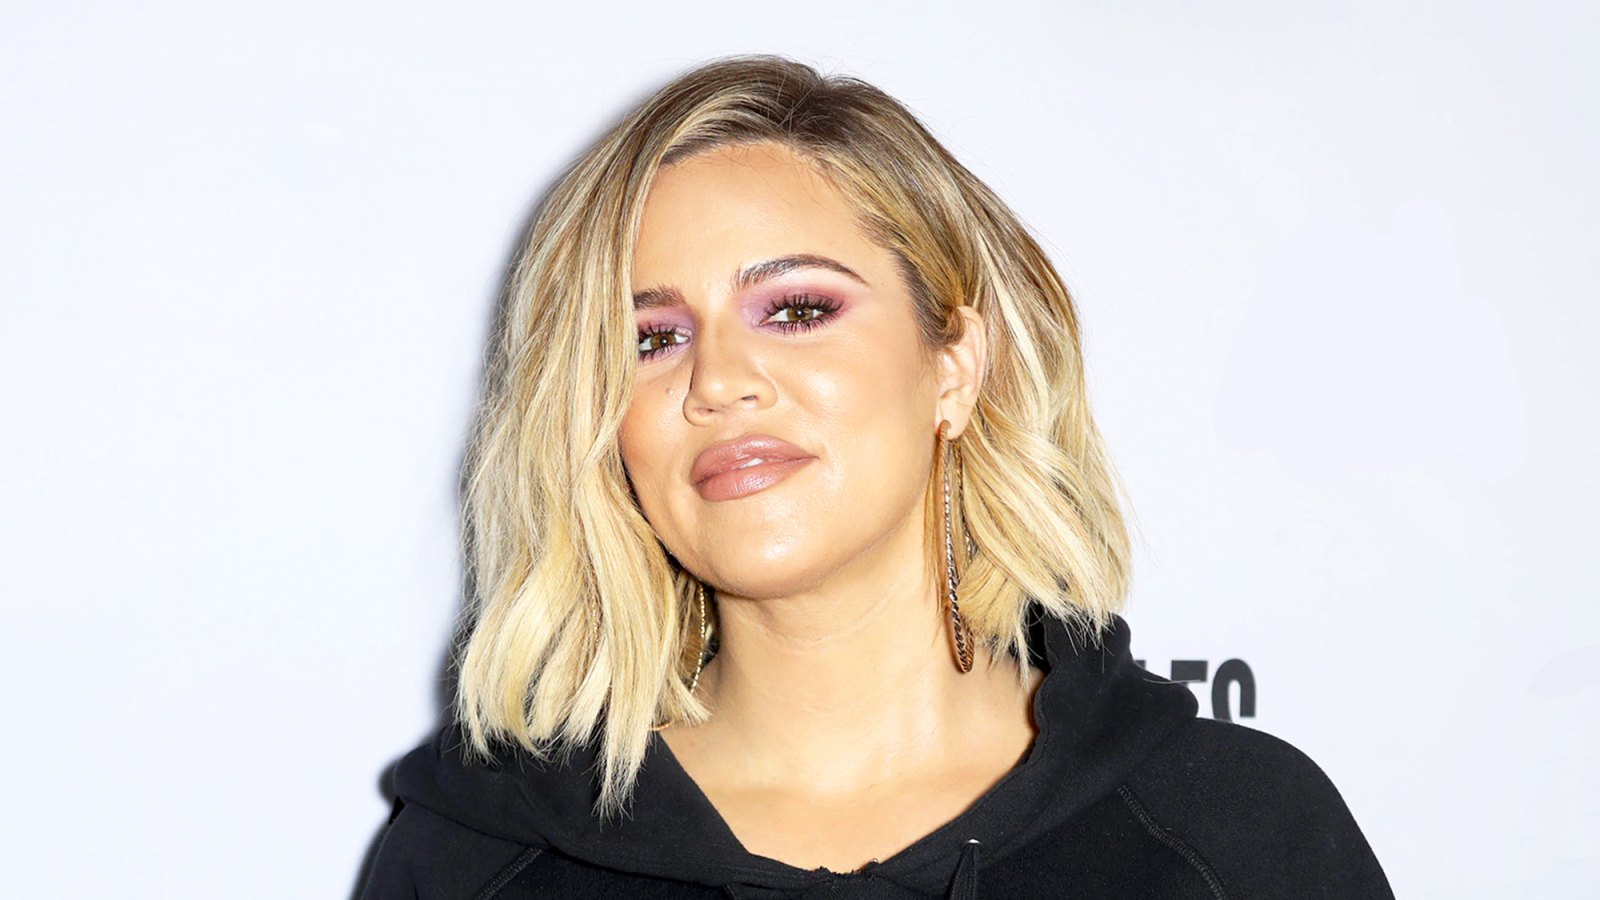 Khloe Kardashian attends the 2017 Good American Pop-Up in Collaboration with VFILES in New York City.